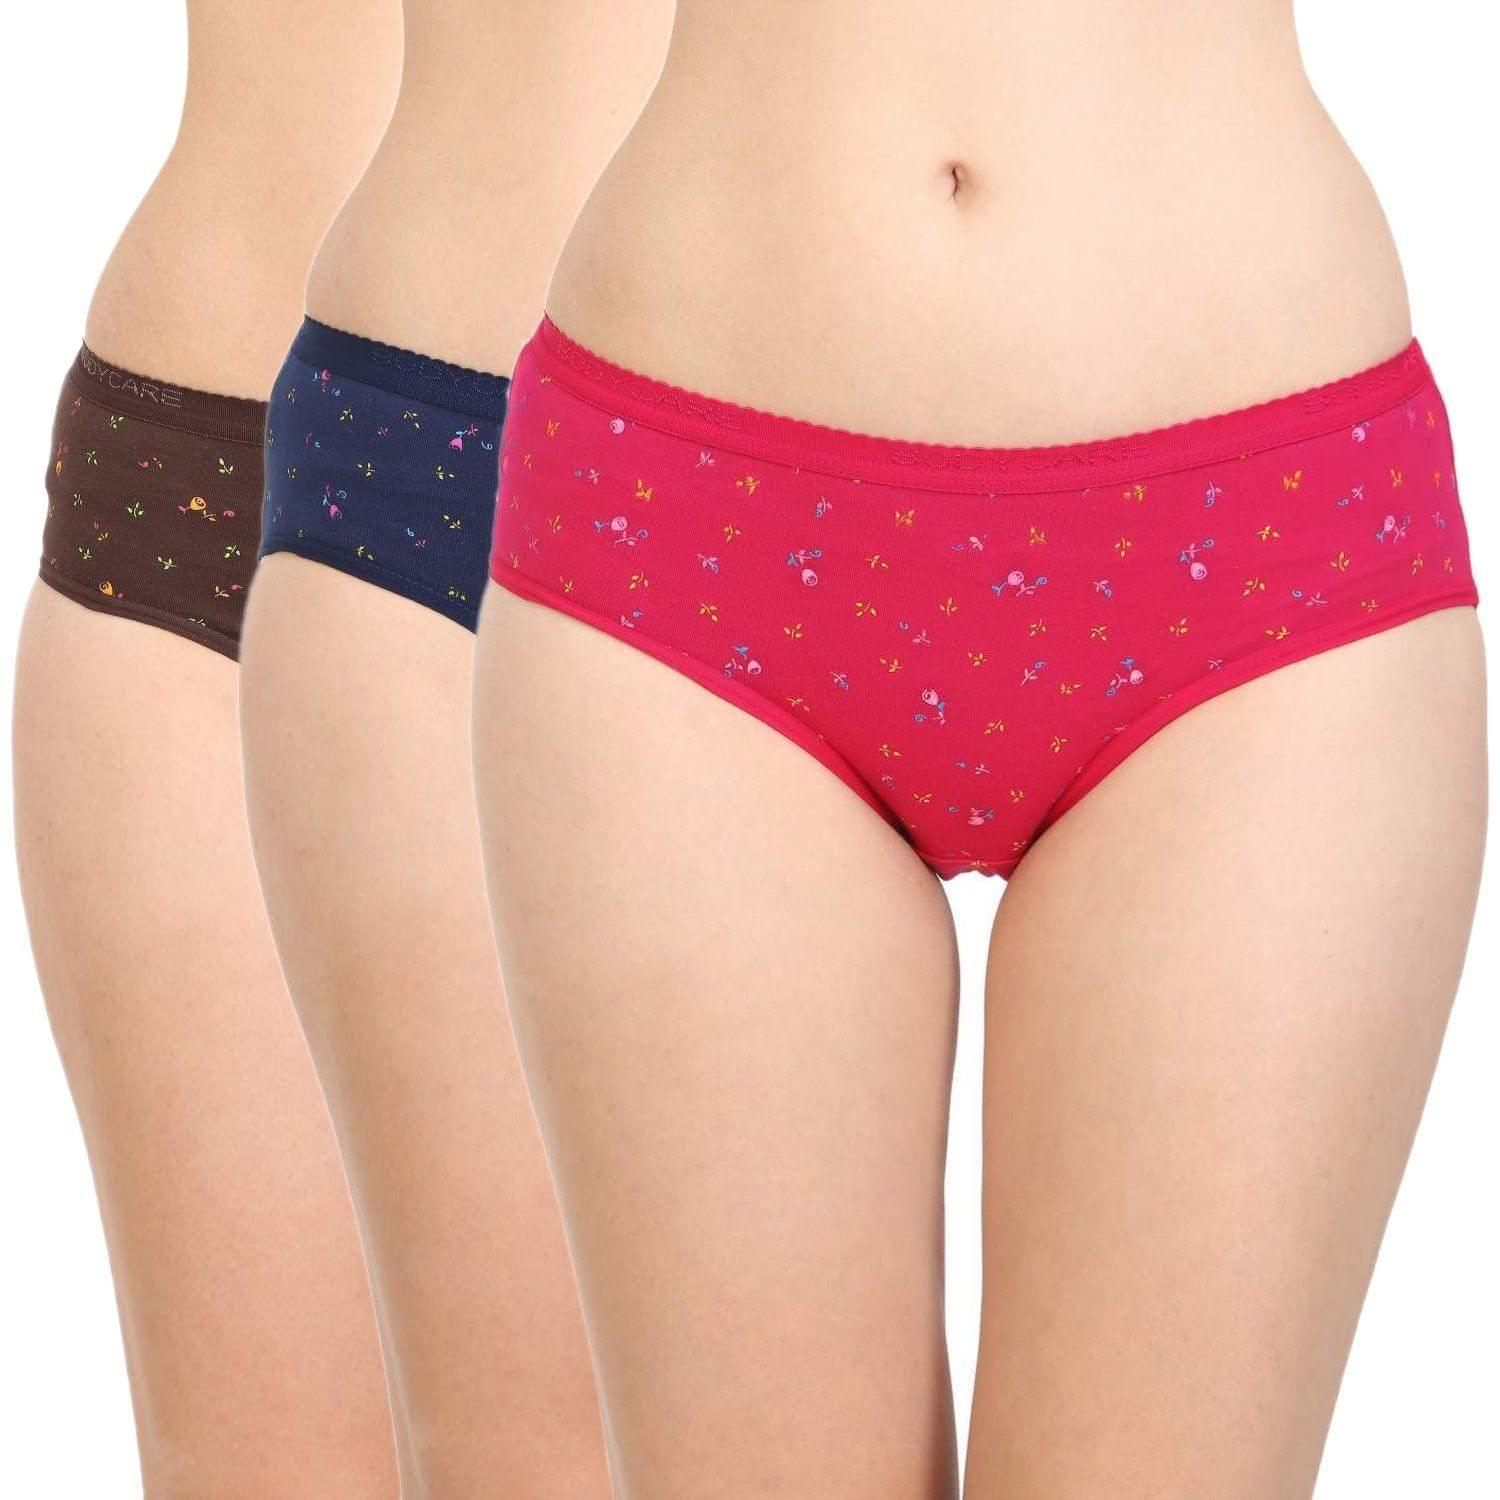 BODYCARE Women's Cotton Printed High Cut Panty (4000_4XL_Assorted) Pack of 3